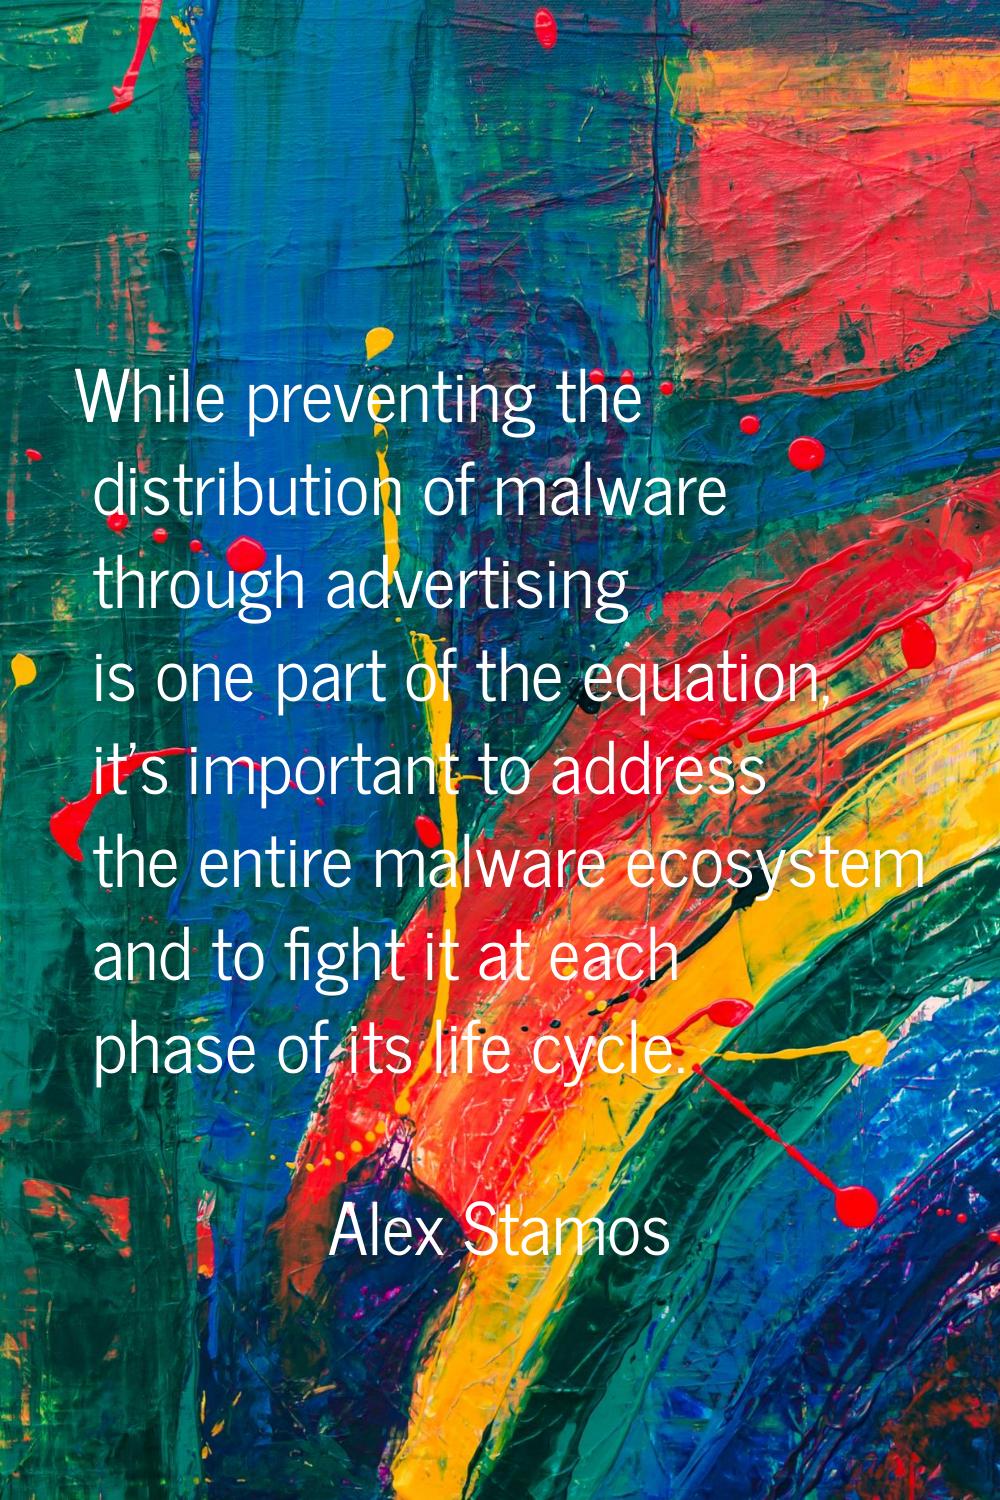 While preventing the distribution of malware through advertising is one part of the equation, it's 